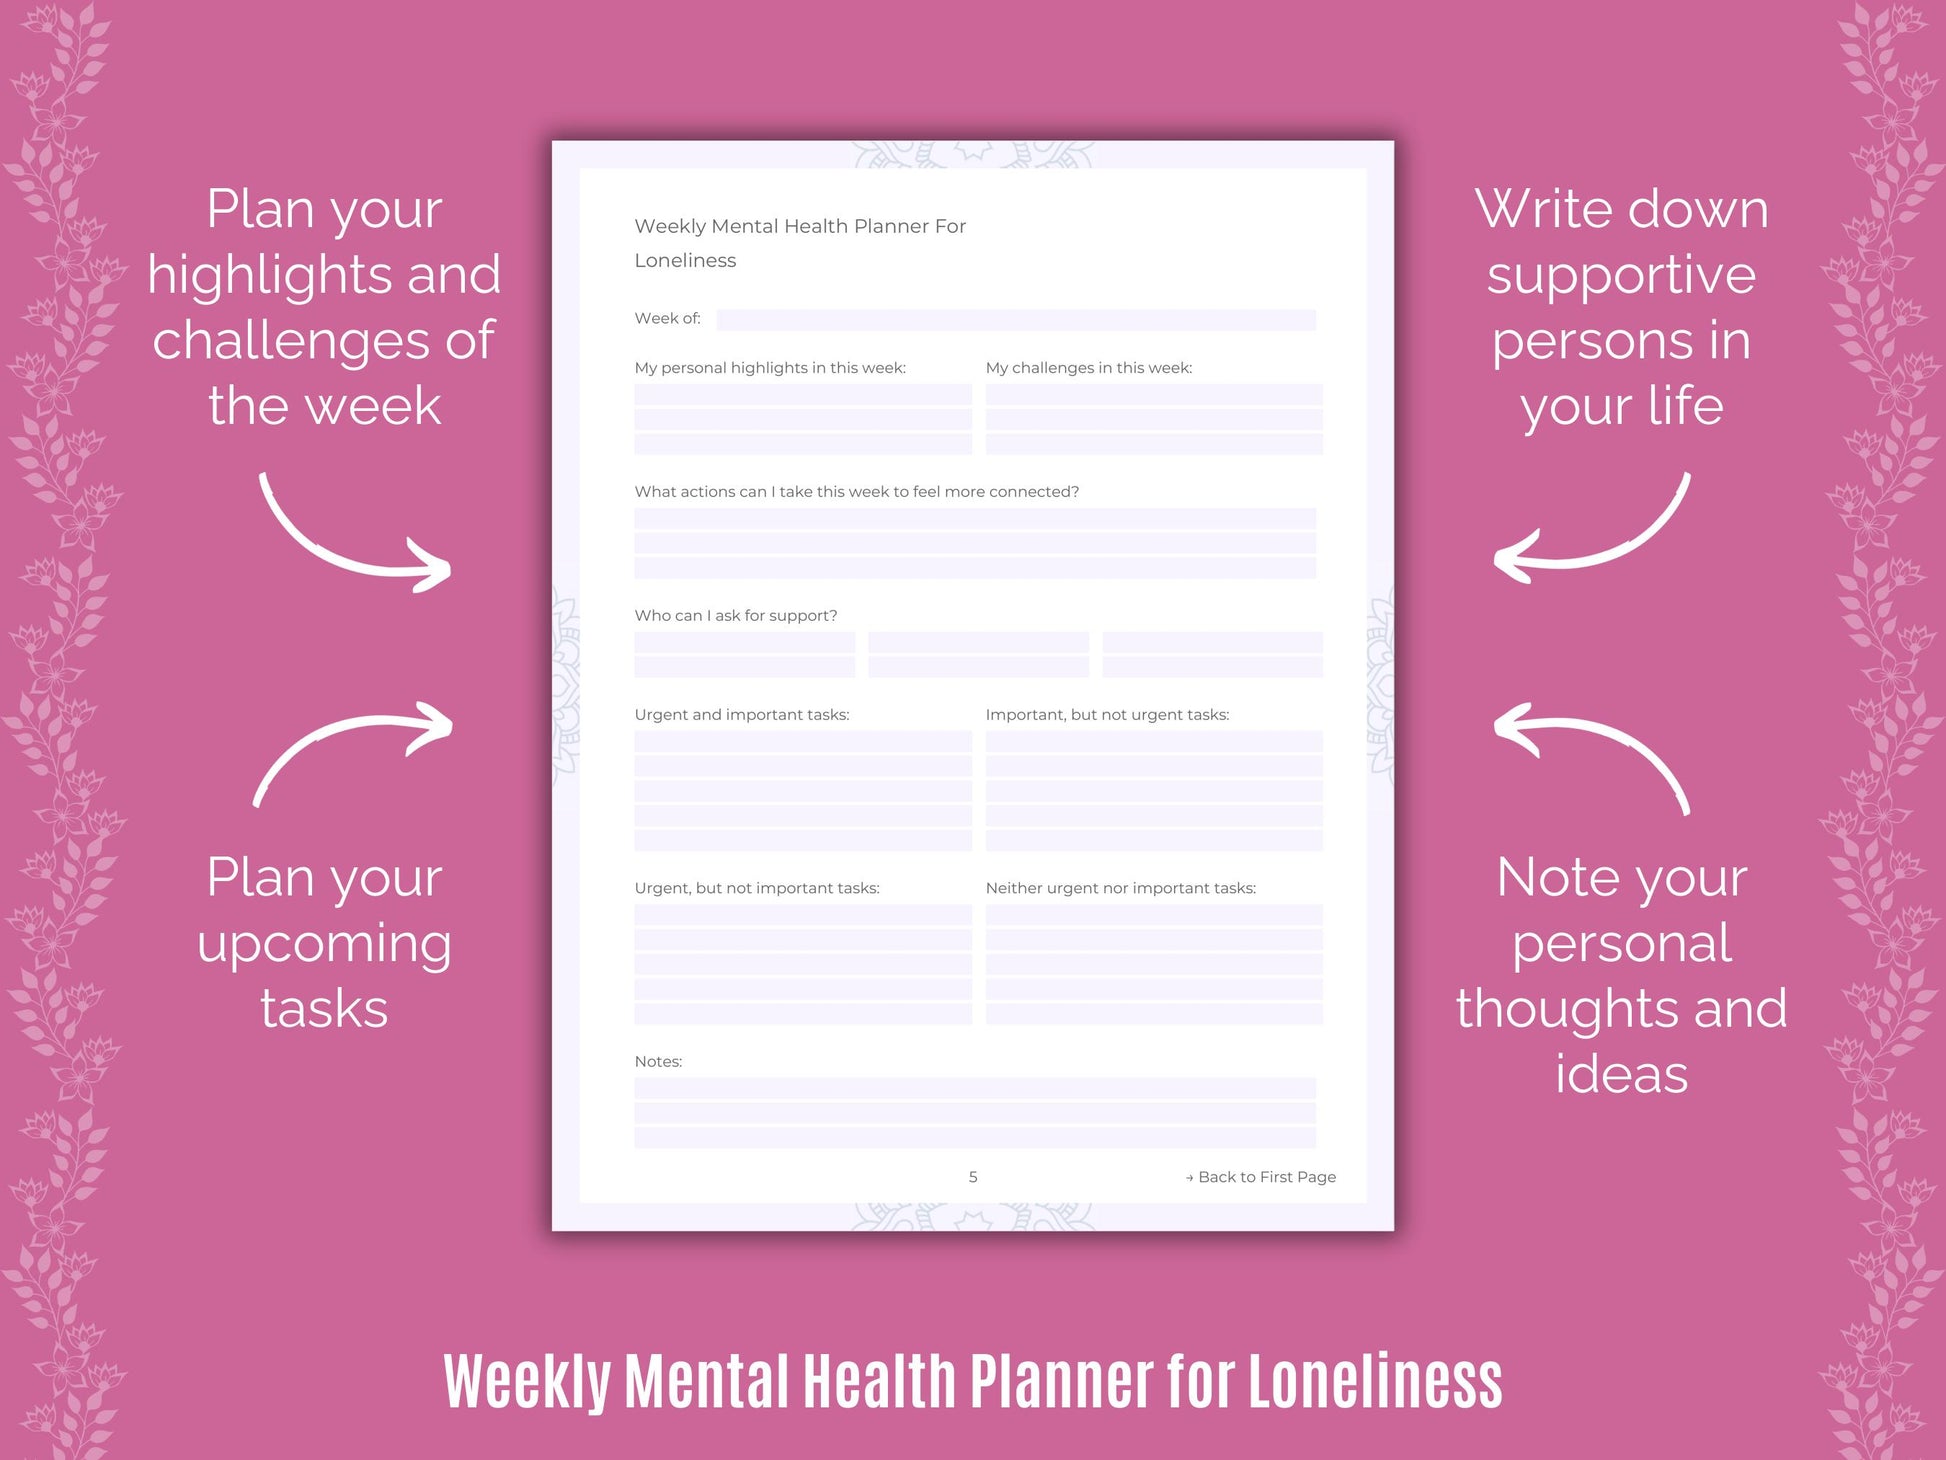 Loneliness Resources, Goal Setting, Loneliness Mental Health, Loneliness Journals, Journaling, Loneliness Workbooks, Loneliness Planners, Loneliness Templates, Loneliness Therapy, Loneliness Tools, Loneliness Notes, Cheat Sheet, Counseling